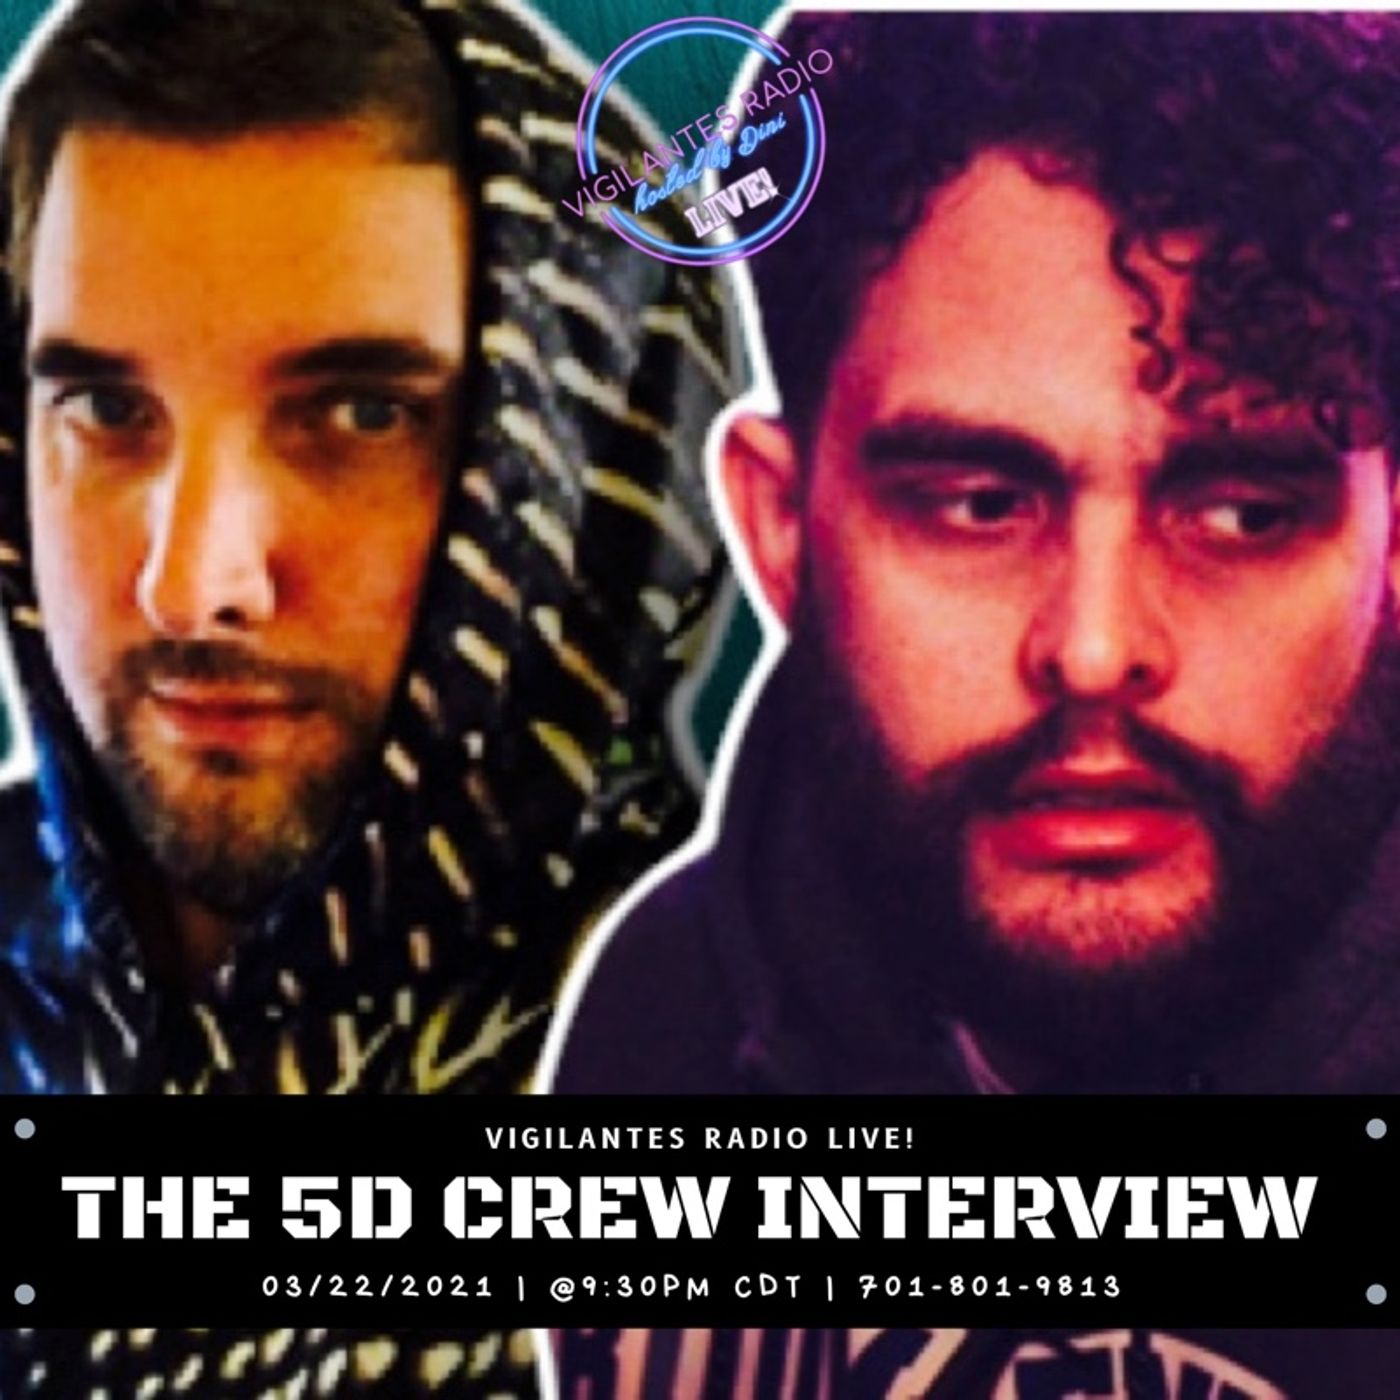 The 5D Crew Interview. Image